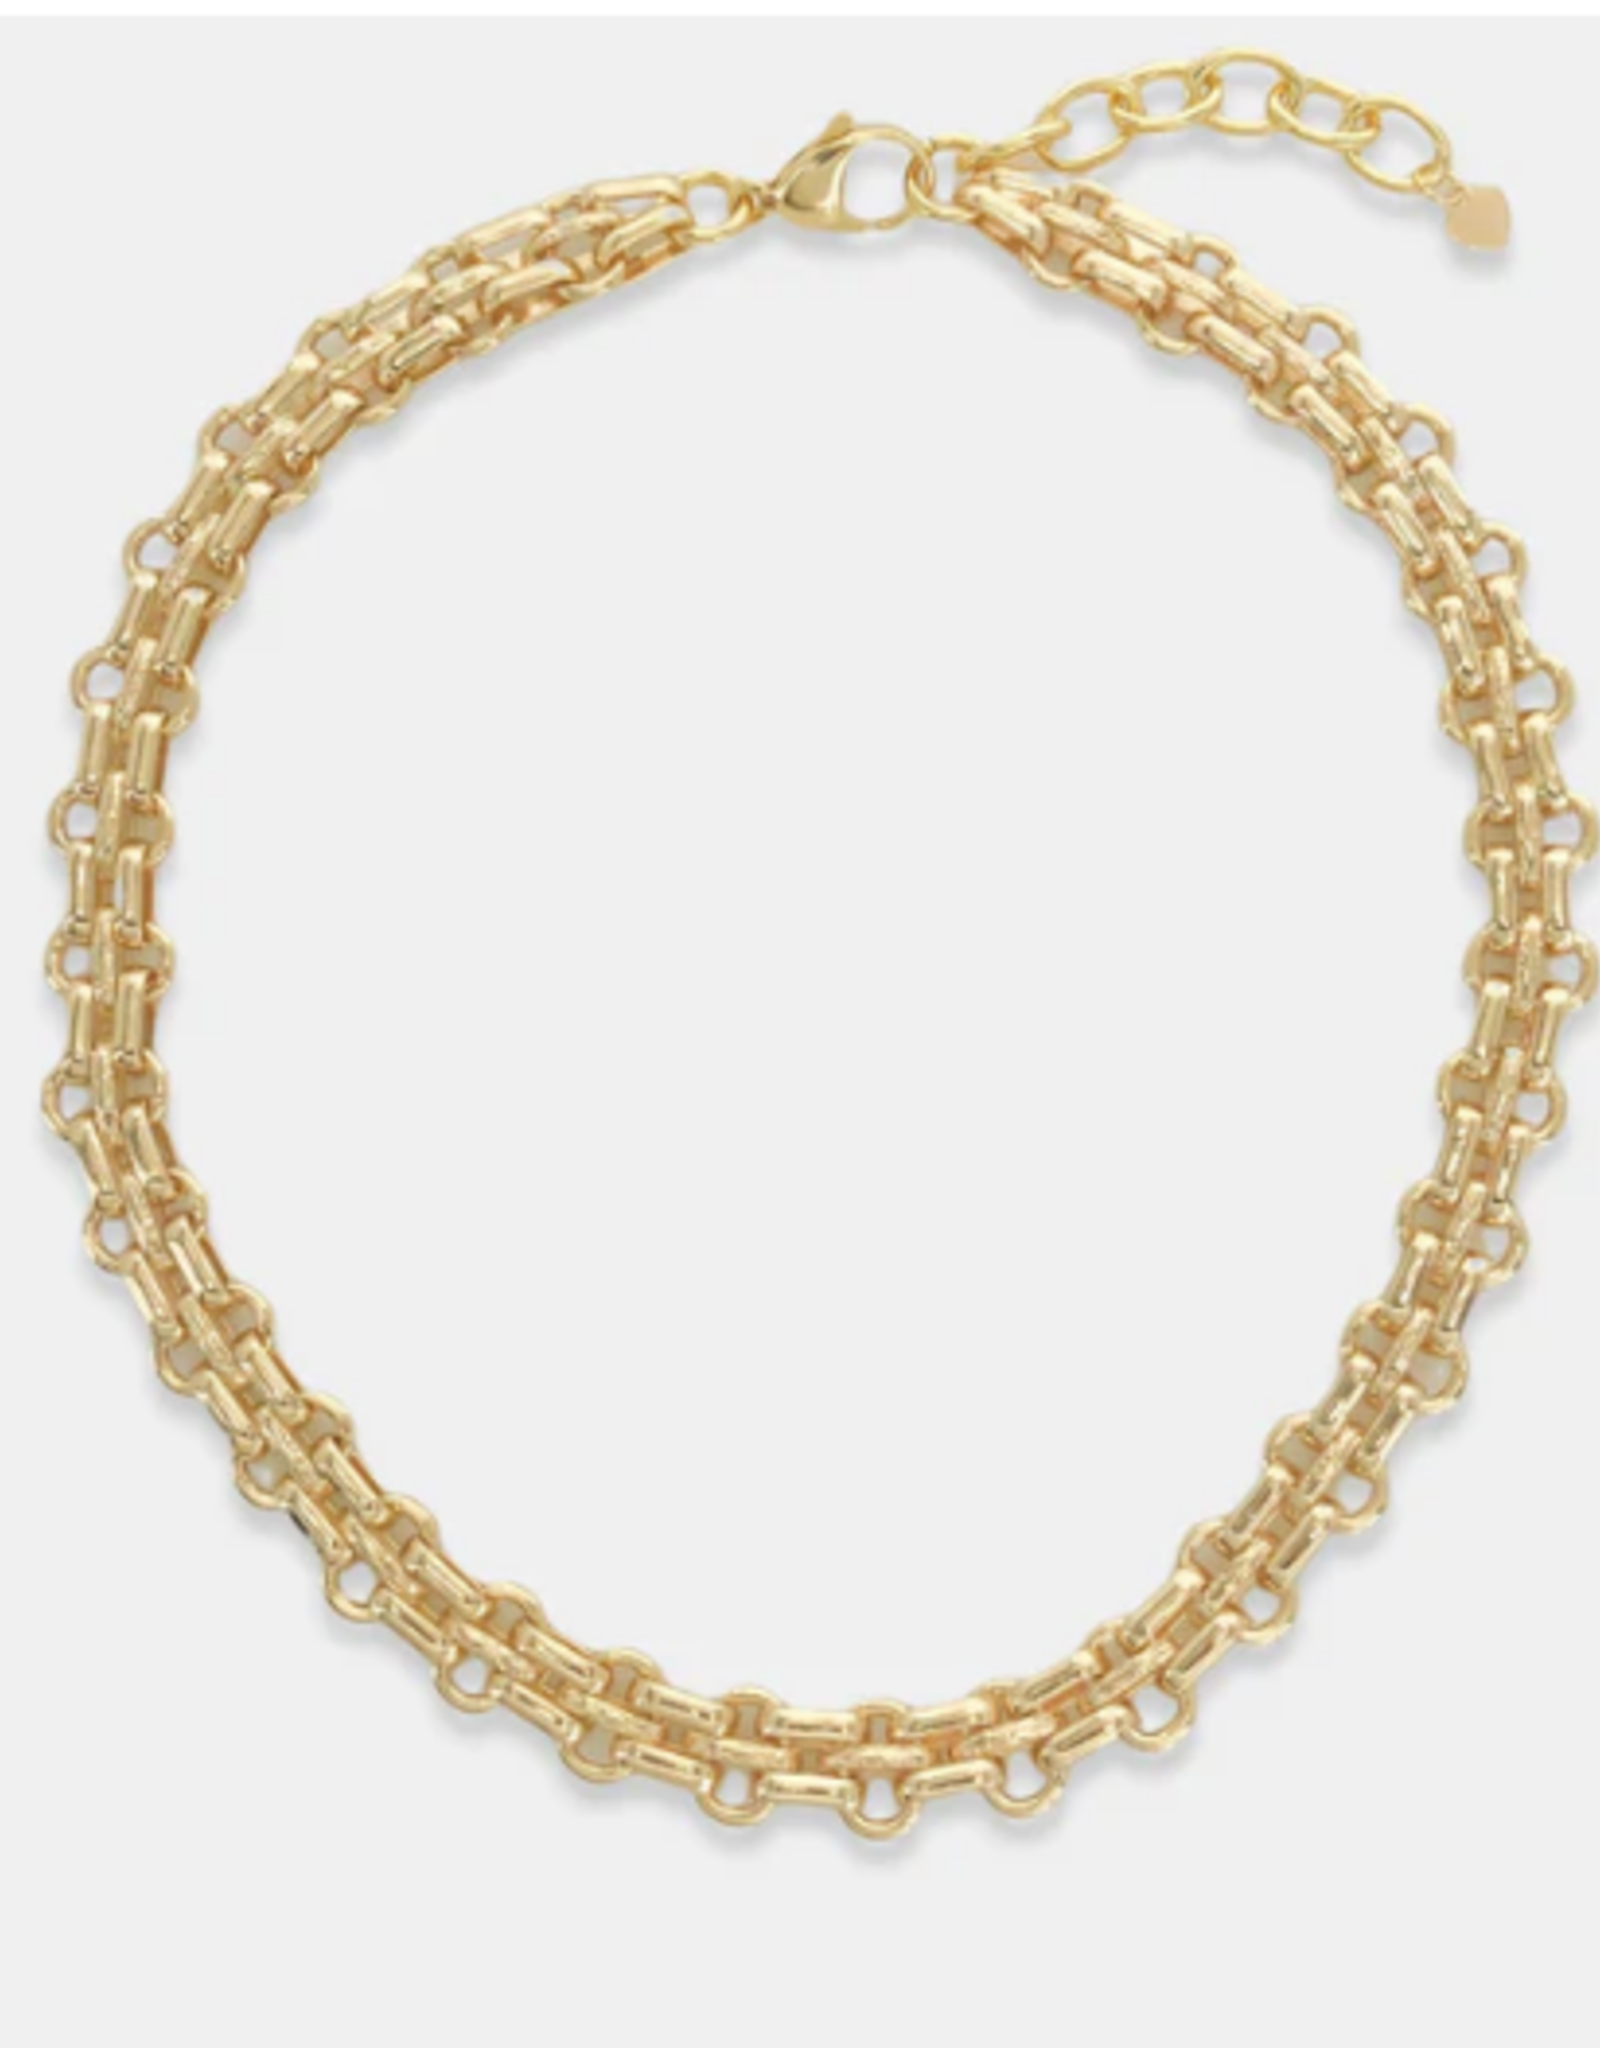 Gold Plated 17" + 2 Triple Box Chain Necklace